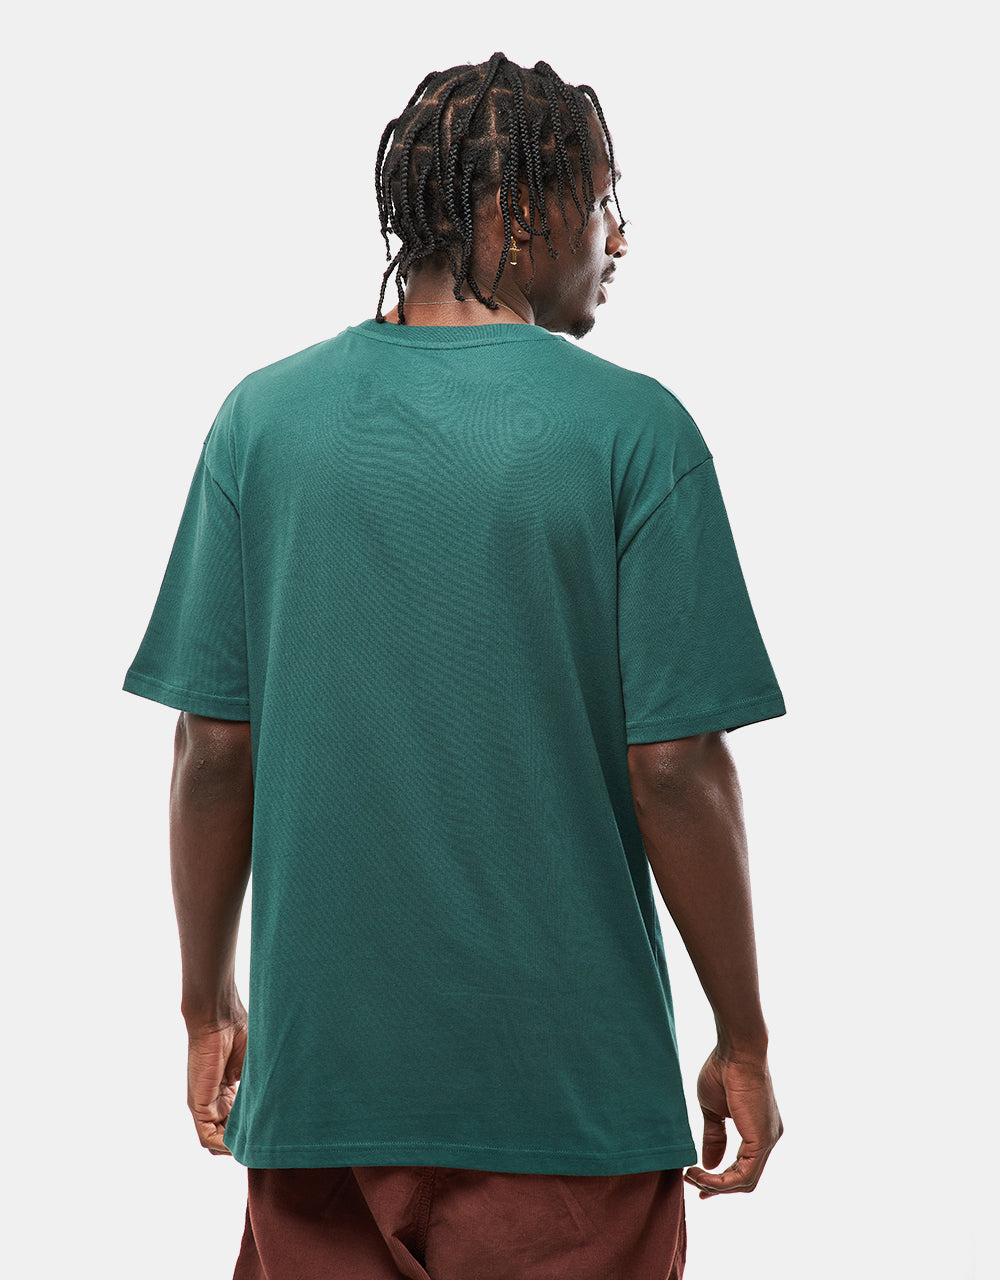 Route One Organic T-Shirt - Forest Green